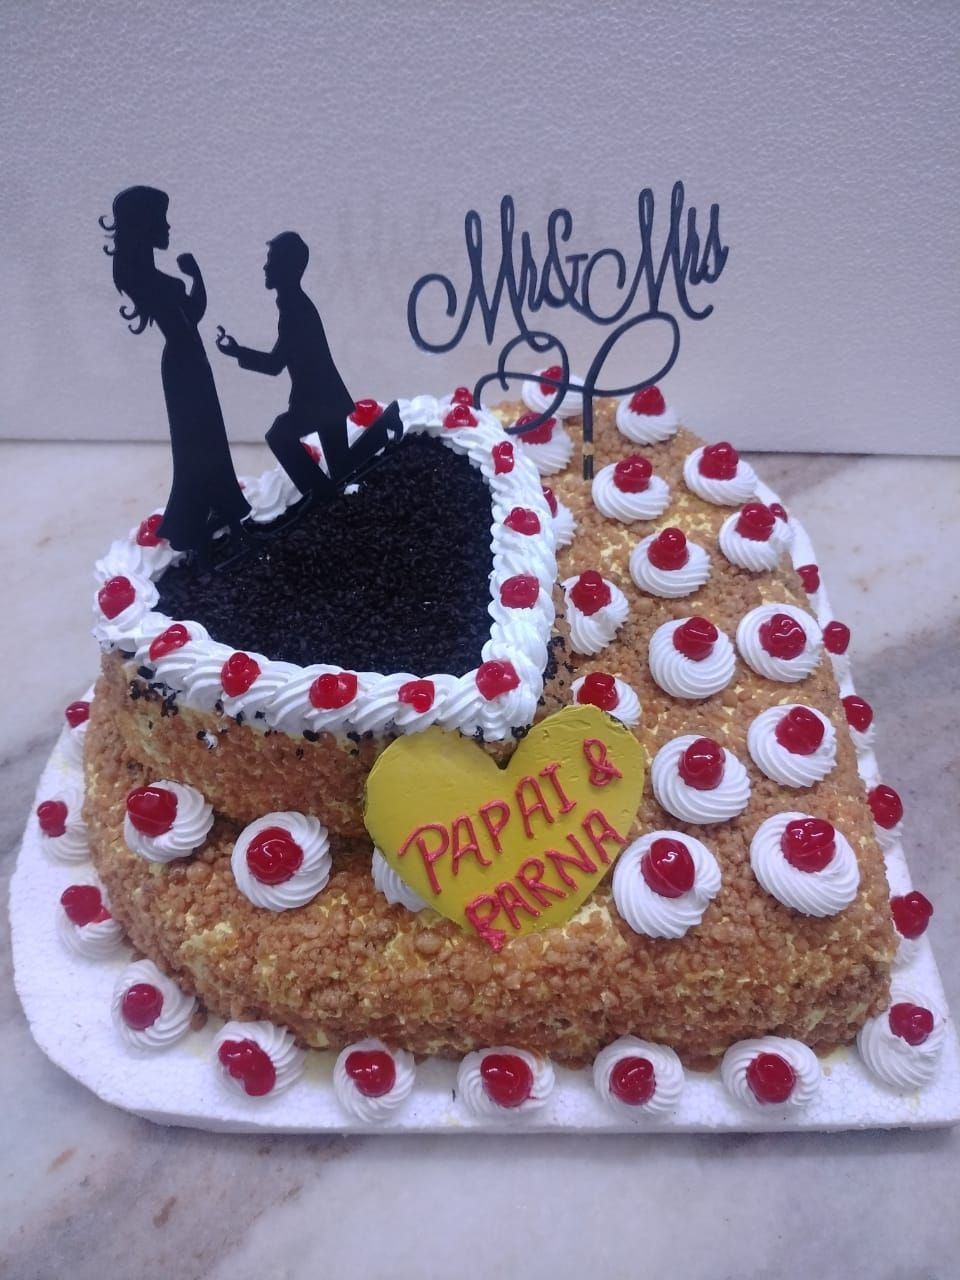 Engagement Wish You Best Cake Couple Name And Photo Edit | Wels